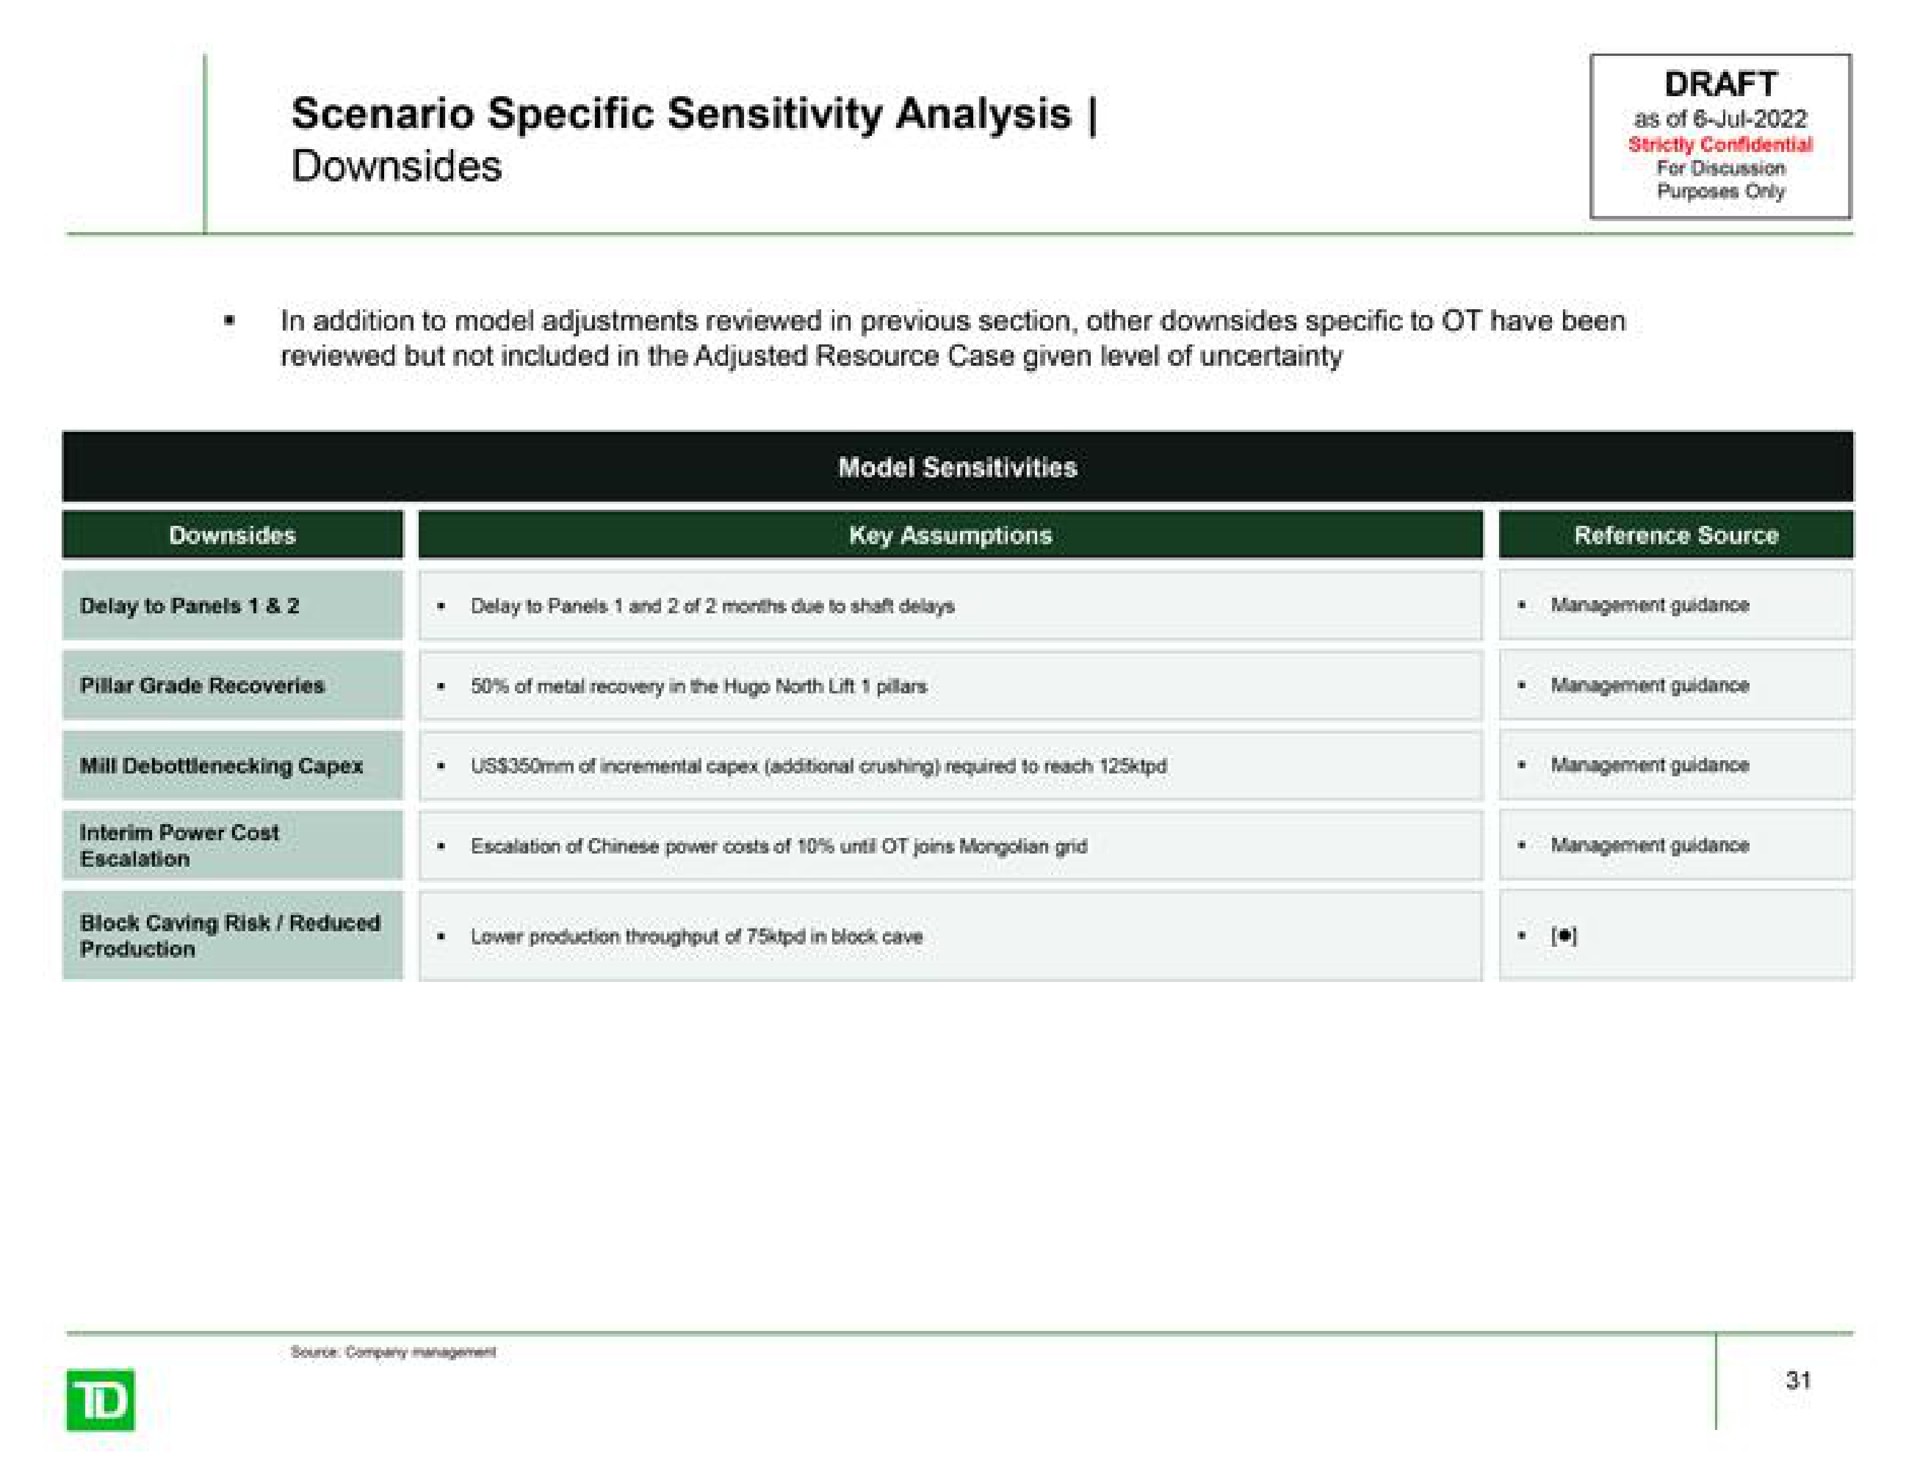 scenario specific sensitivity analysis downsides draft as of for discussion | TD Securities